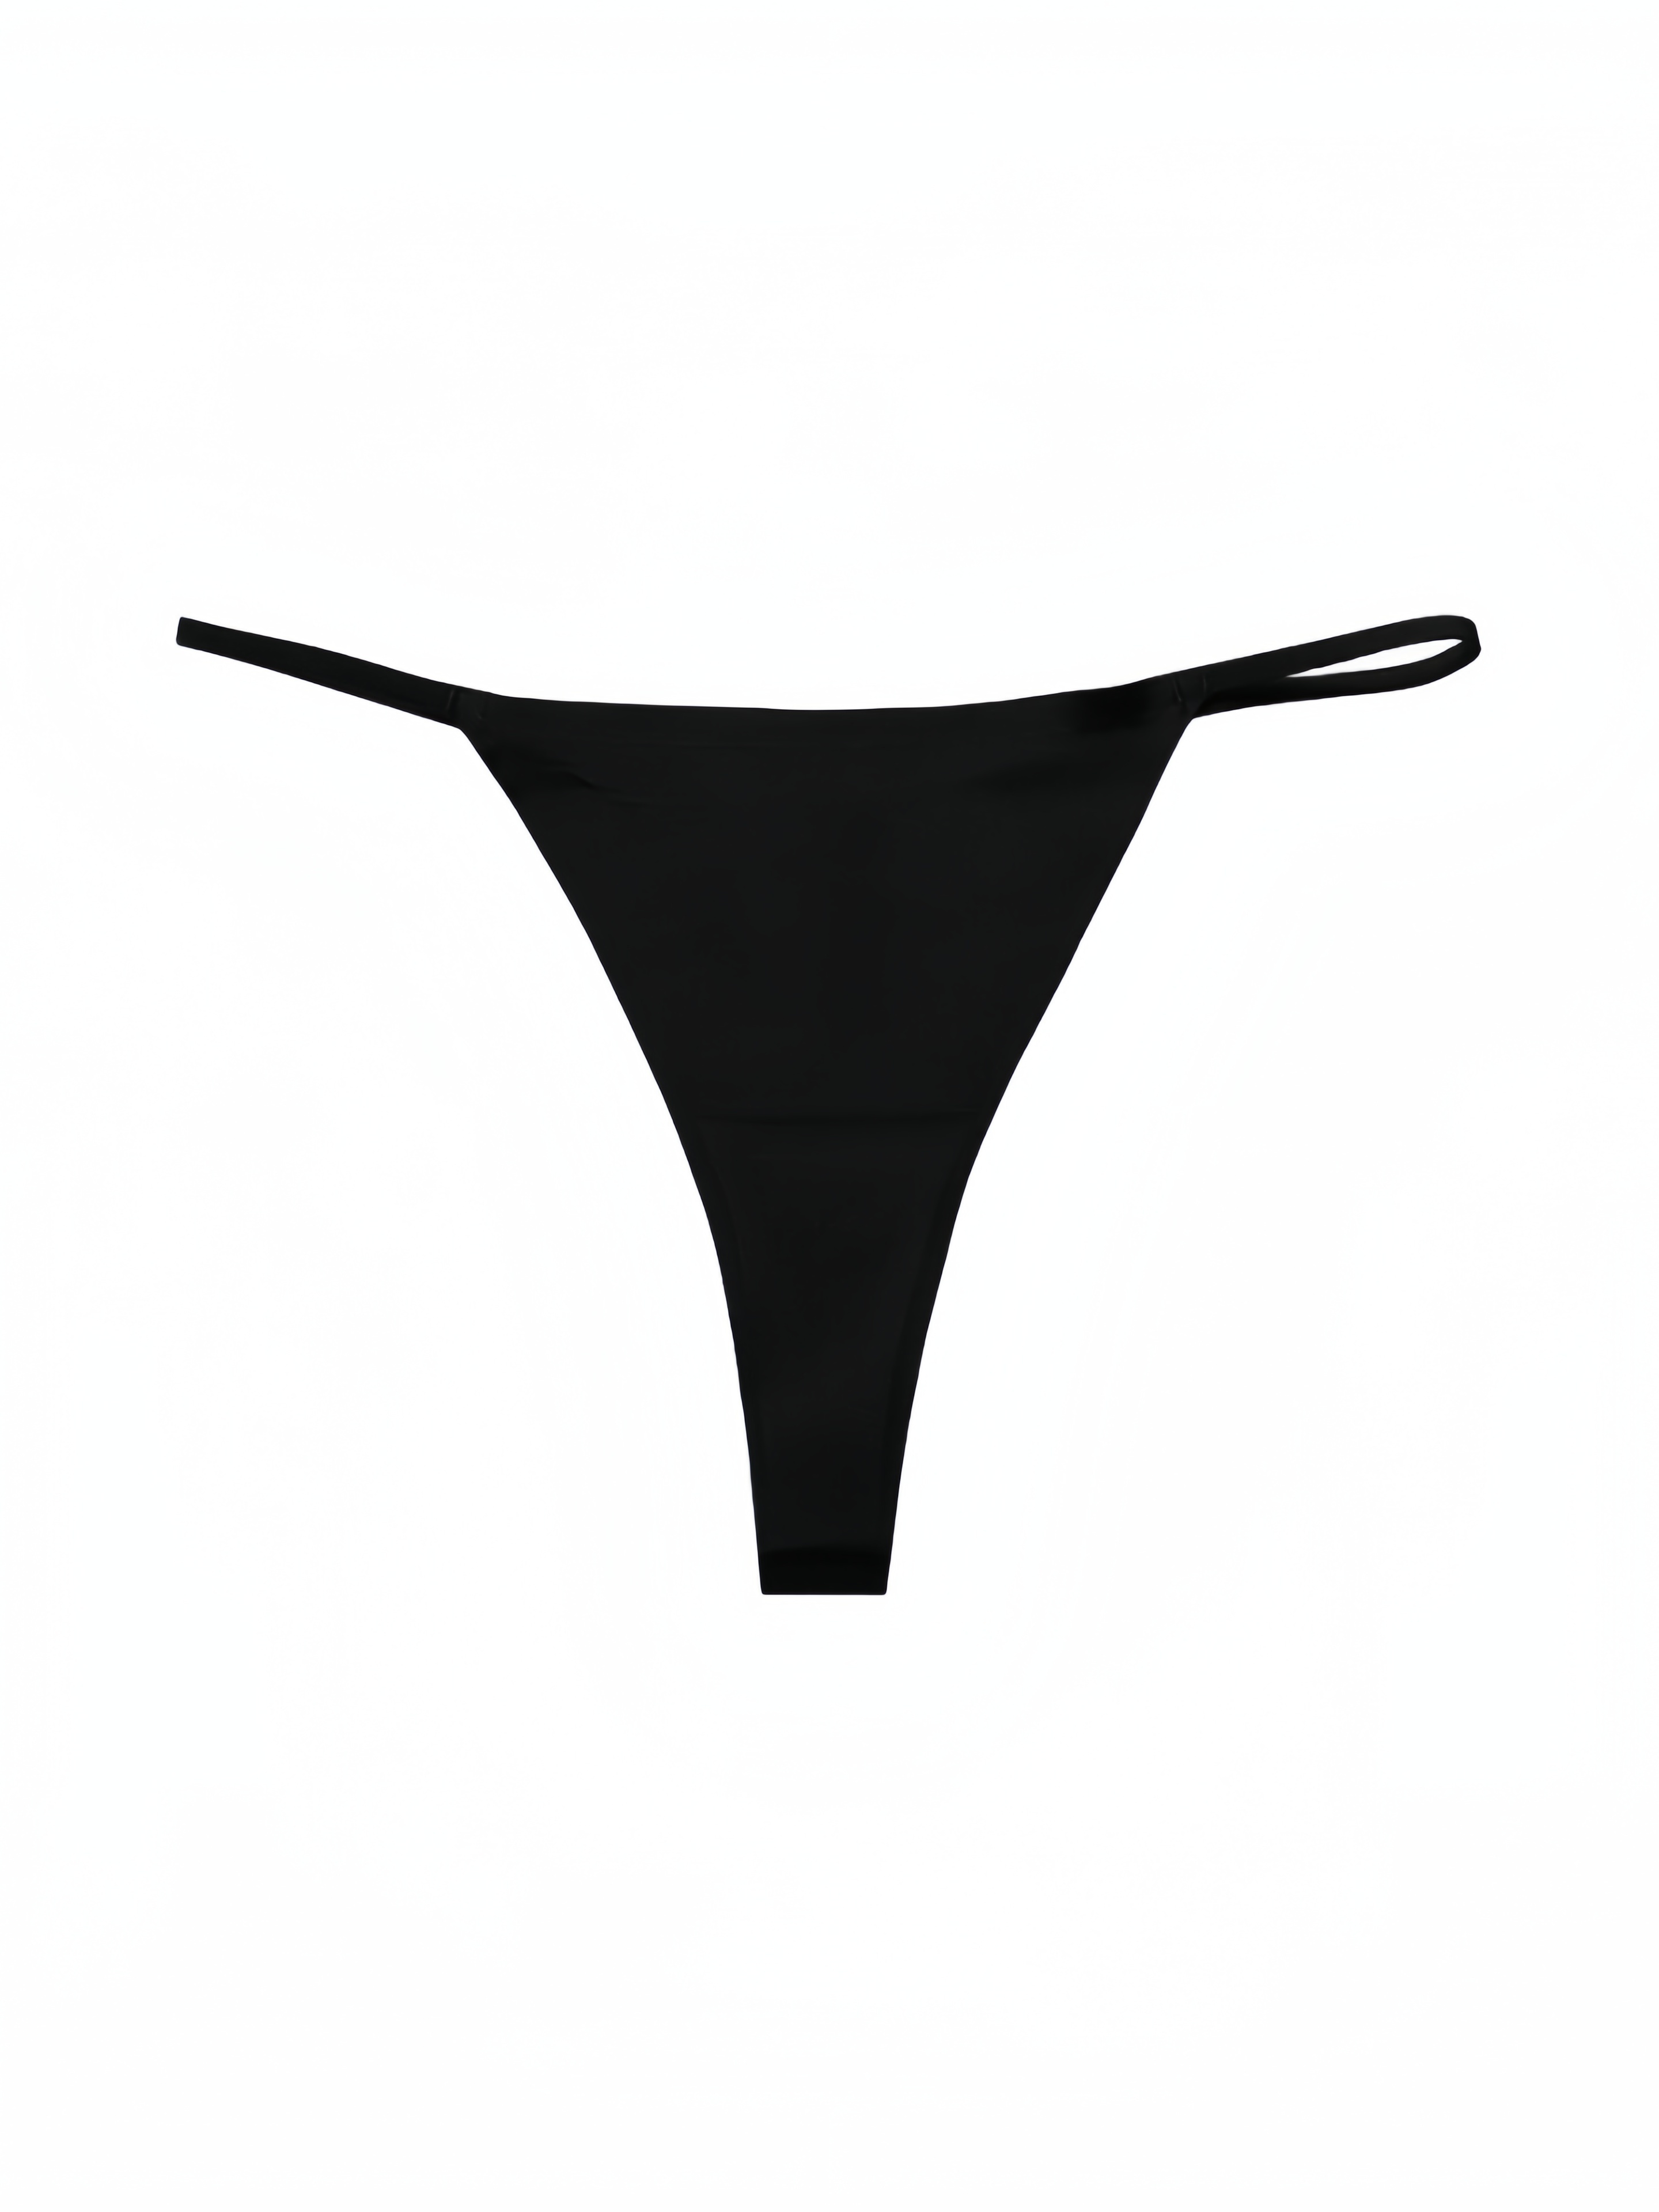 Mens Sexy C String Thong Invisible Sexy Strapless Lingerie